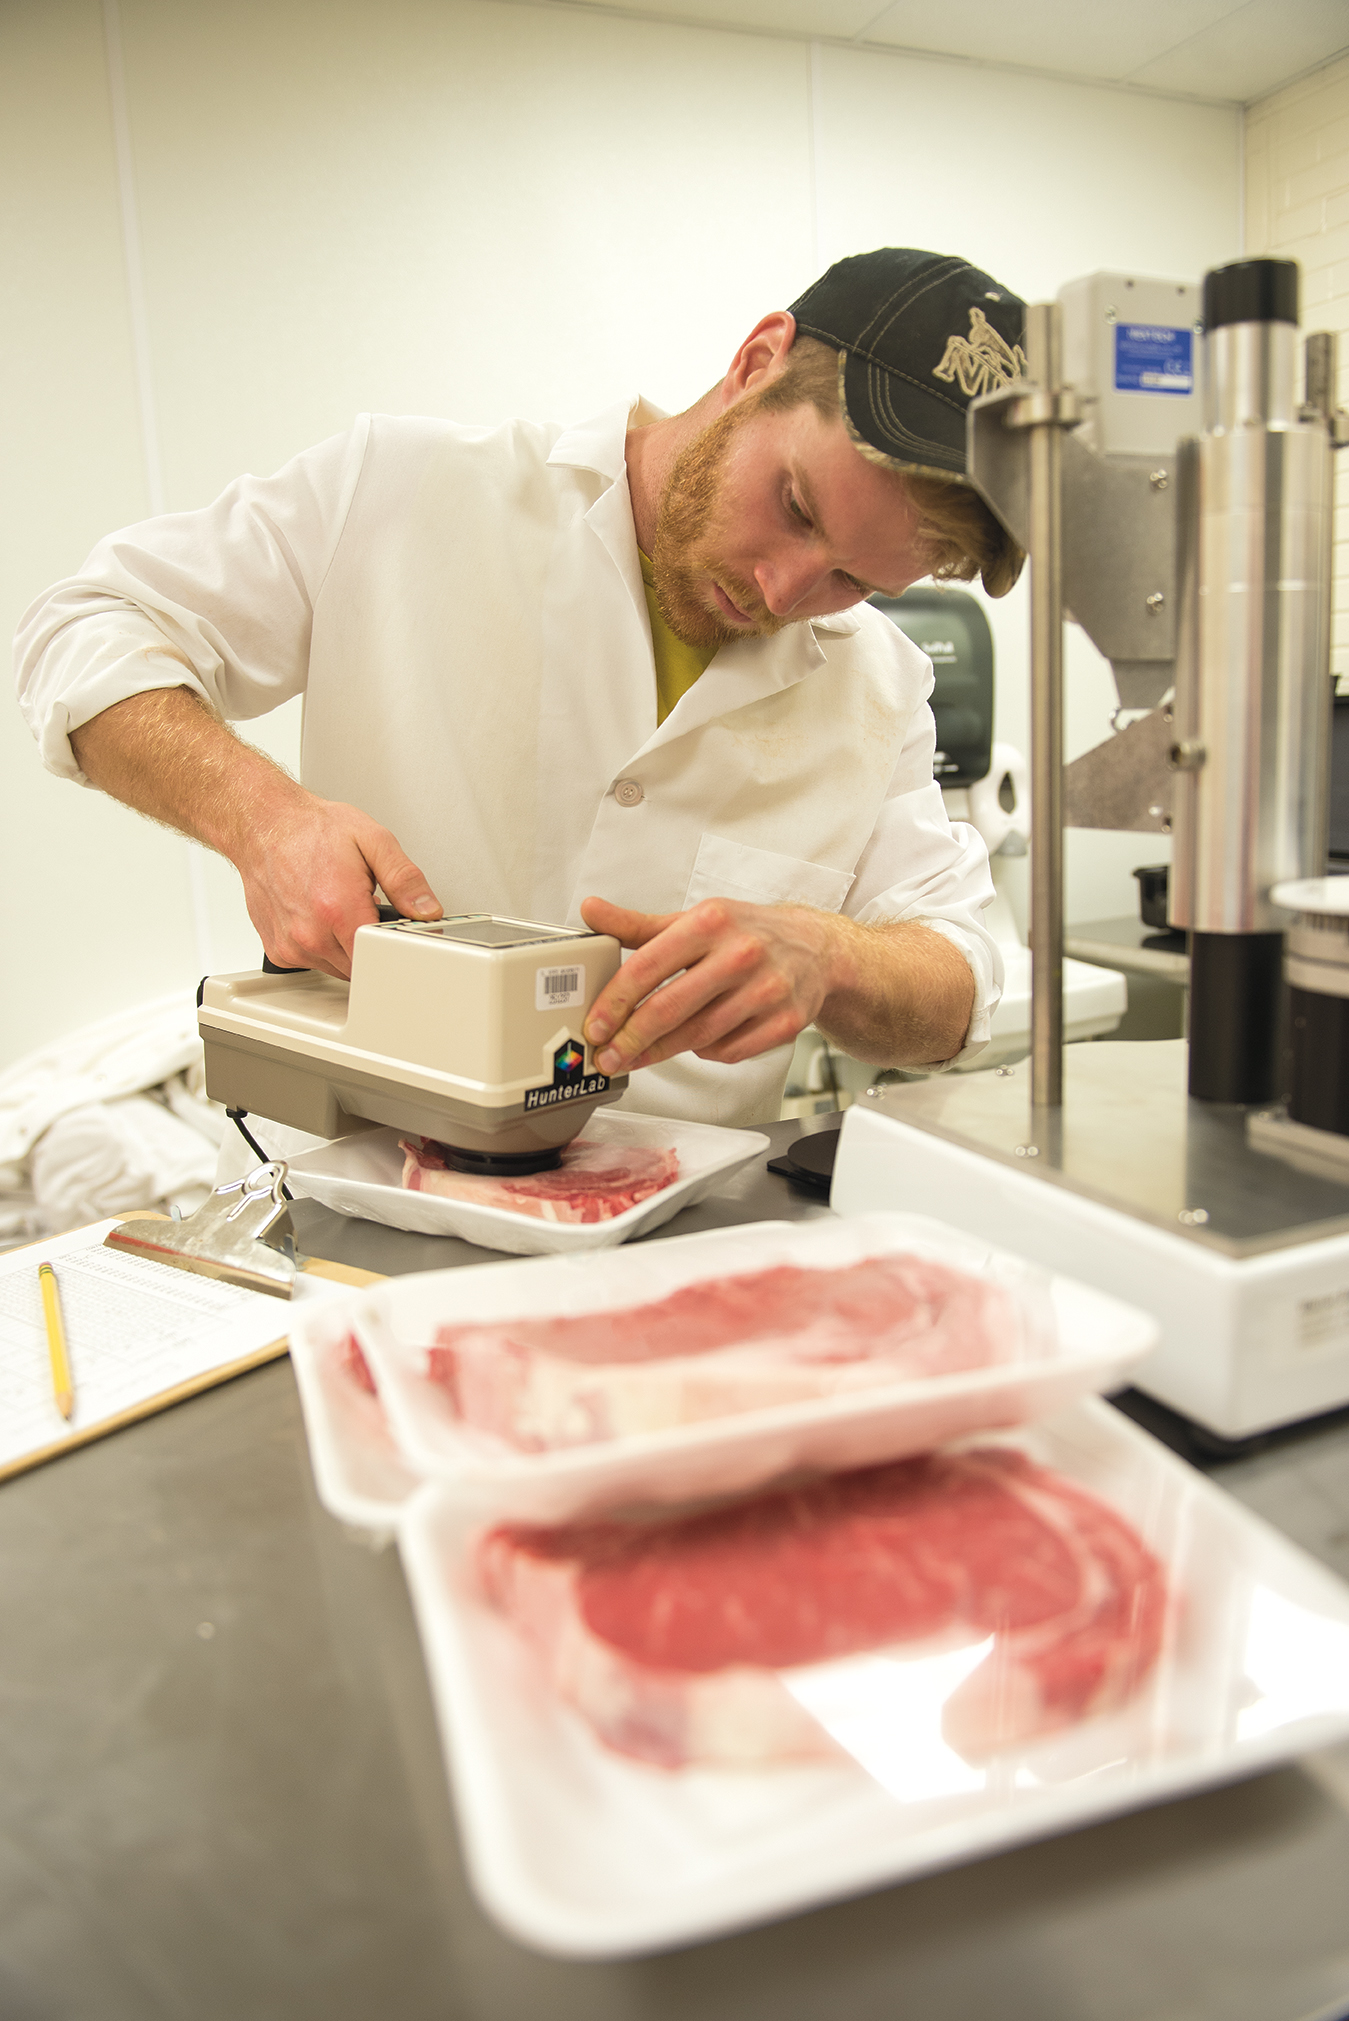 Parmenter uses a colorimeter to measure the color of the rib-eye steaks produced by the cattle. The researchers checked the steaks’ color four times in seven days to measure the color changes the steaks would undergo in a retailer’s case.